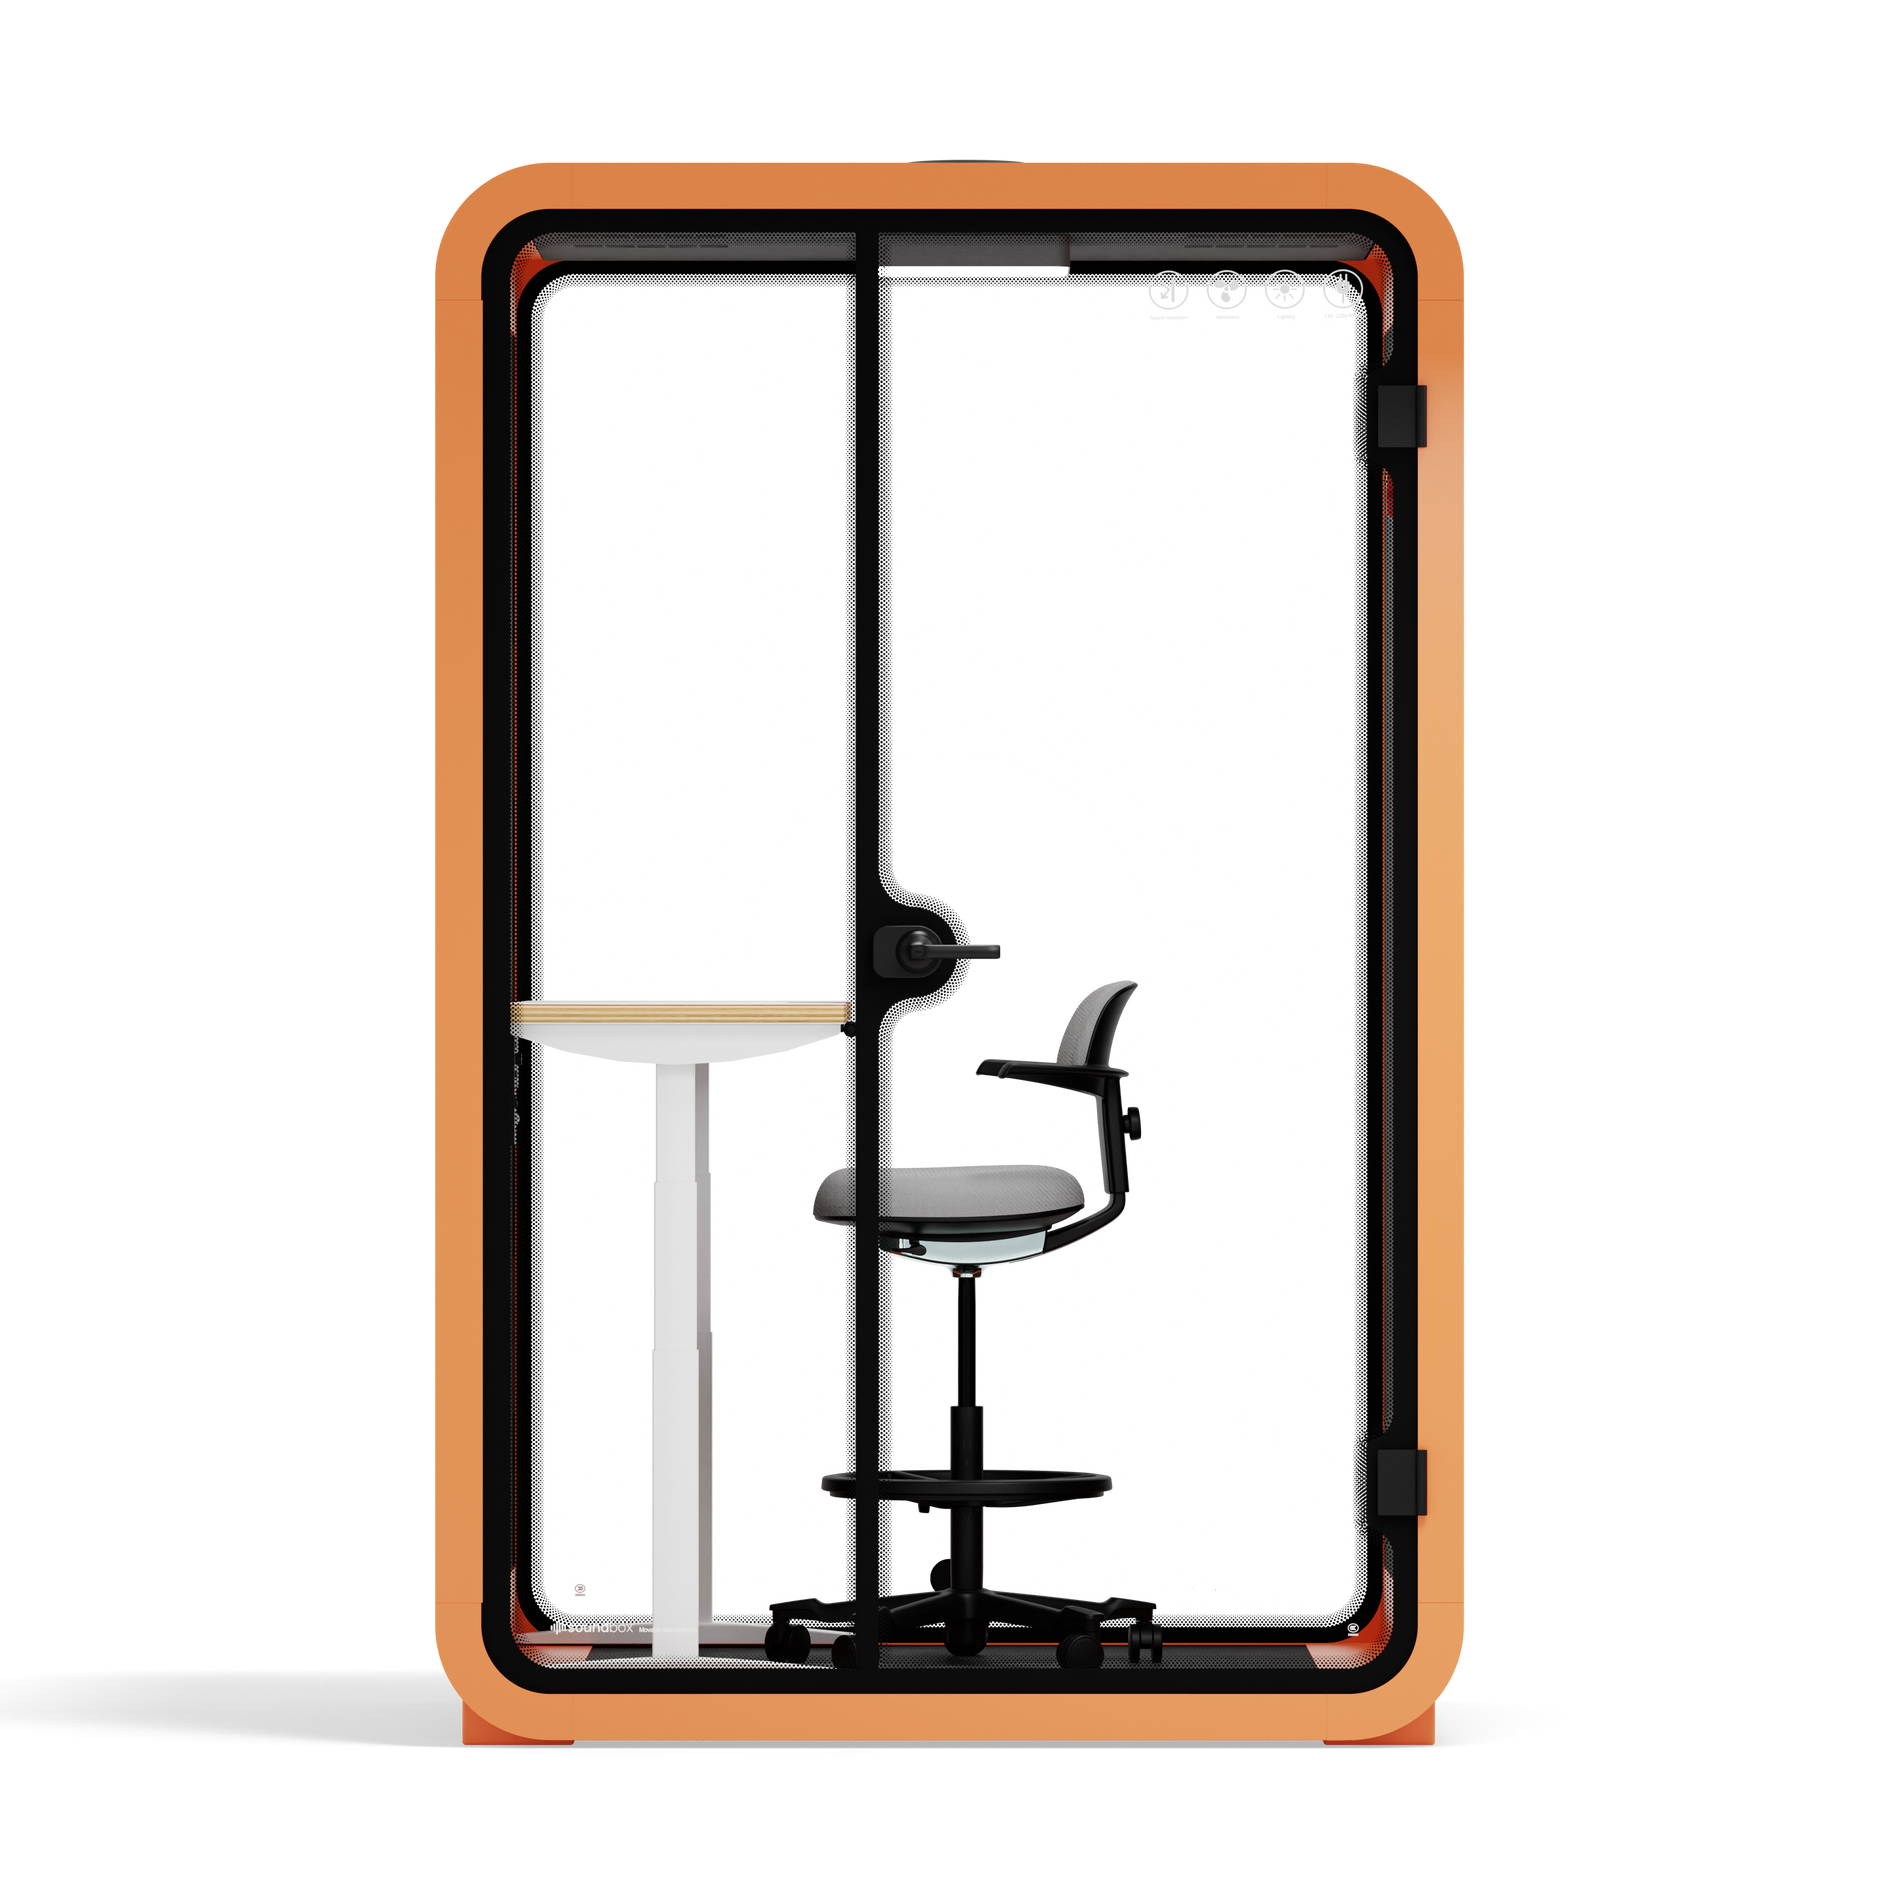 Quell - Office Pod - 2 PersonOrange / Dark Gray / Electric Adjustable Work Station + Stool